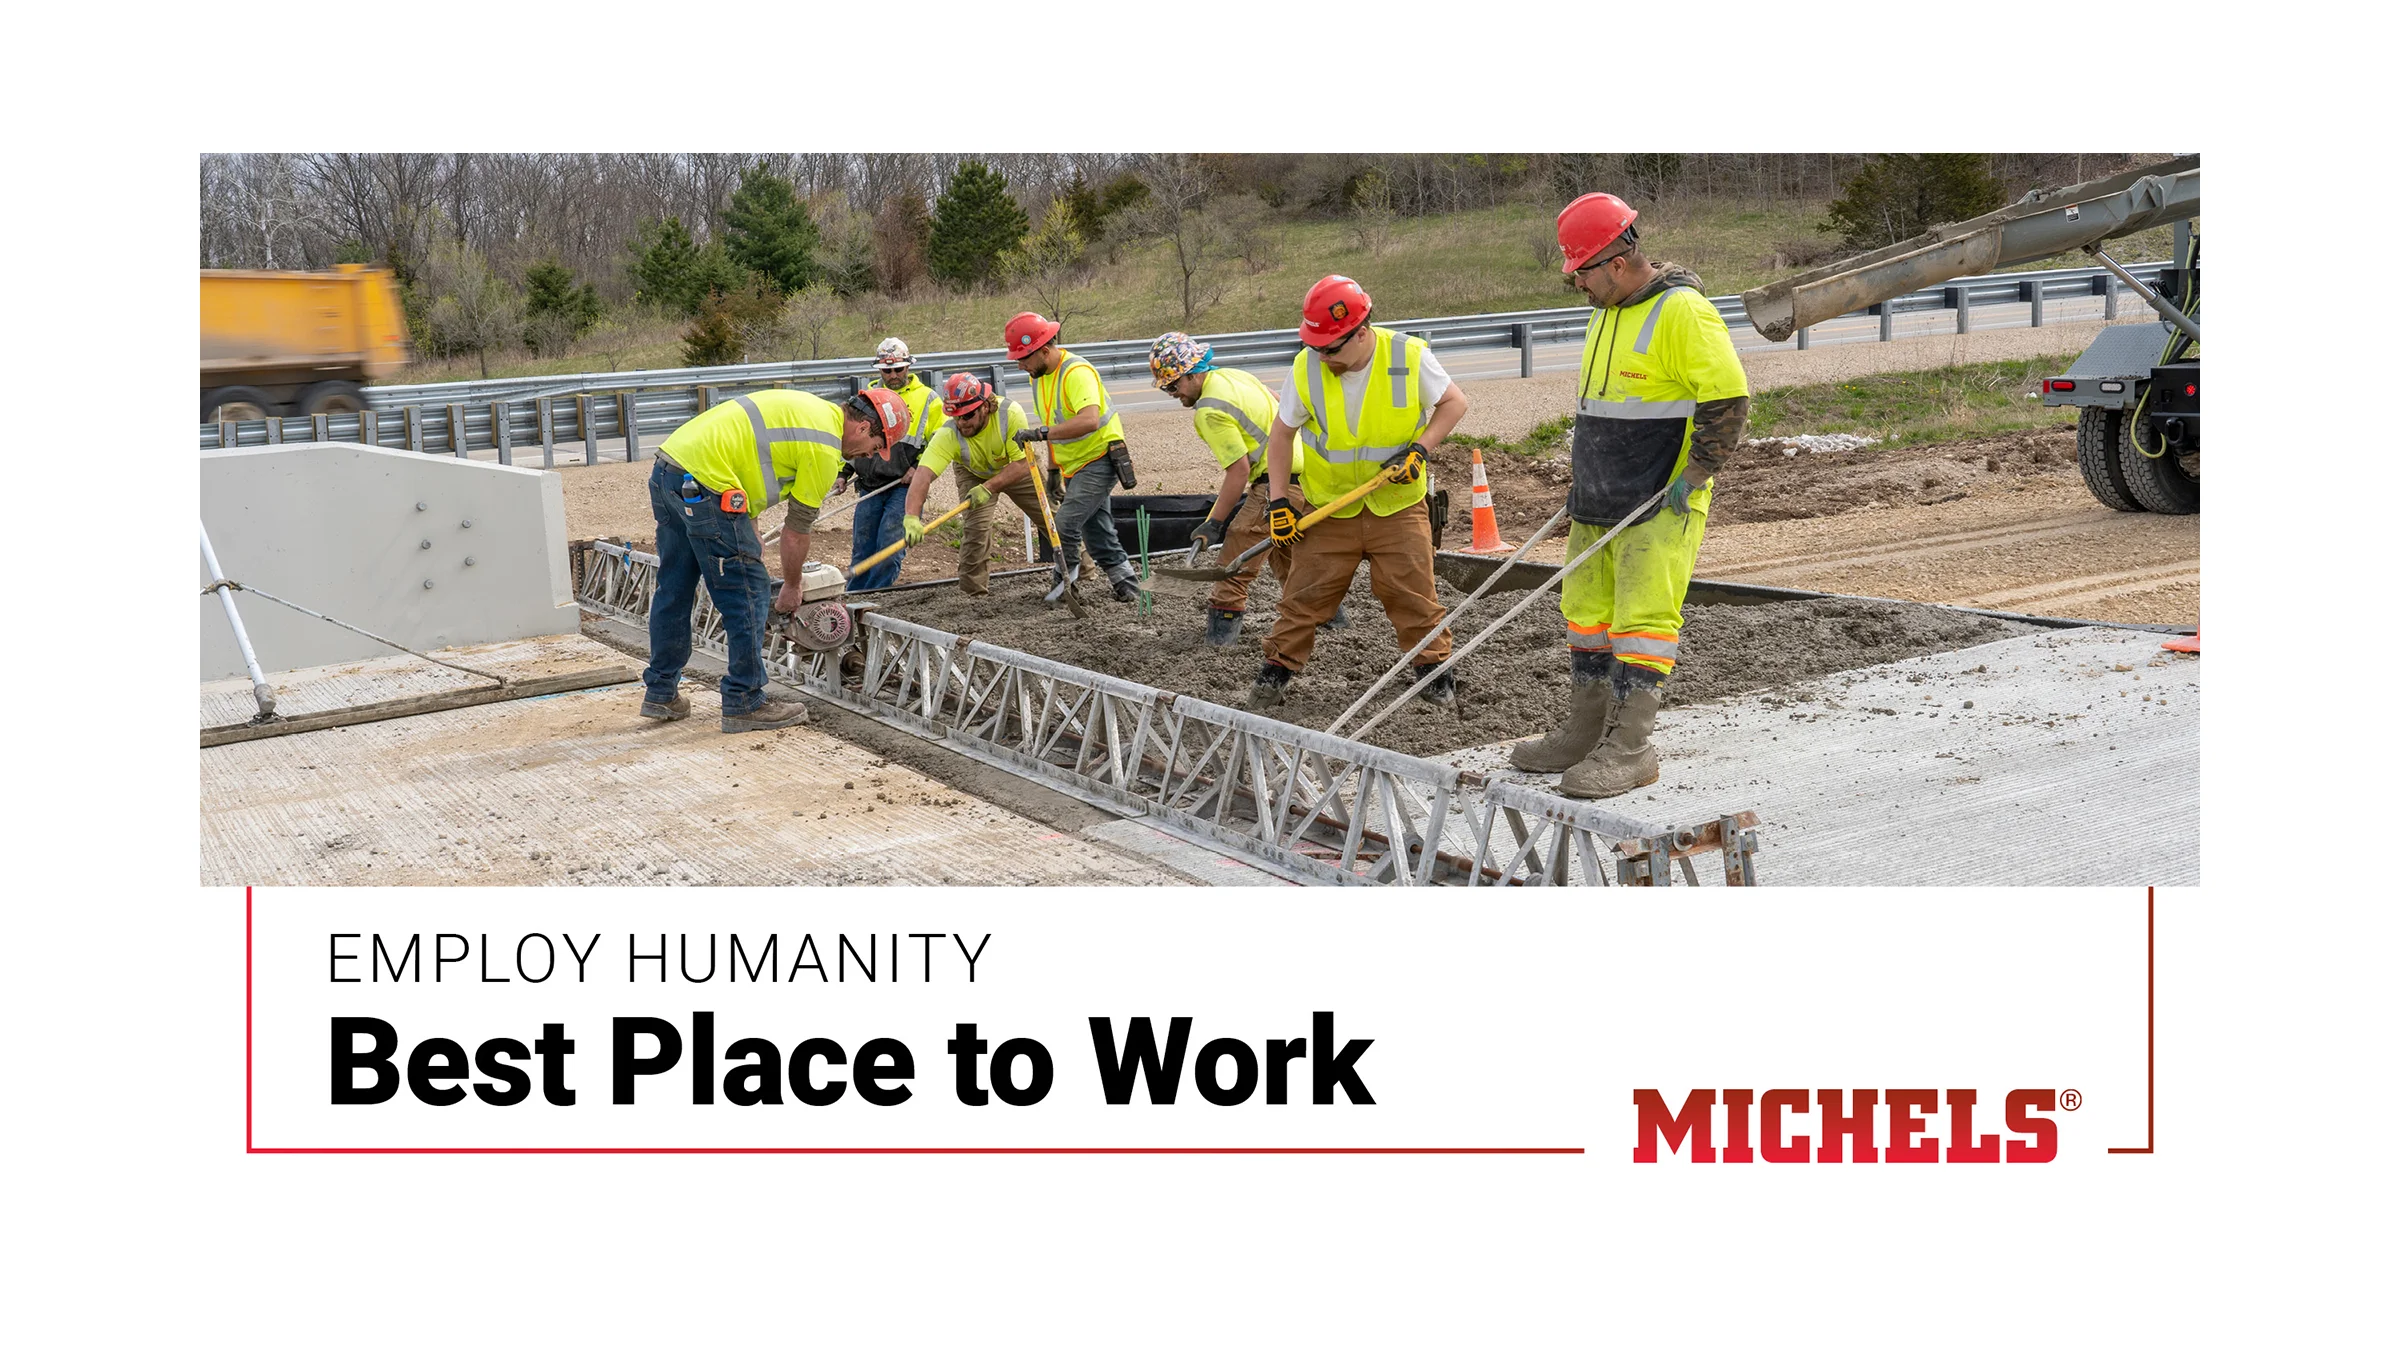 Employ Humanity Best Place to Work logo featuring a Michels paving crew